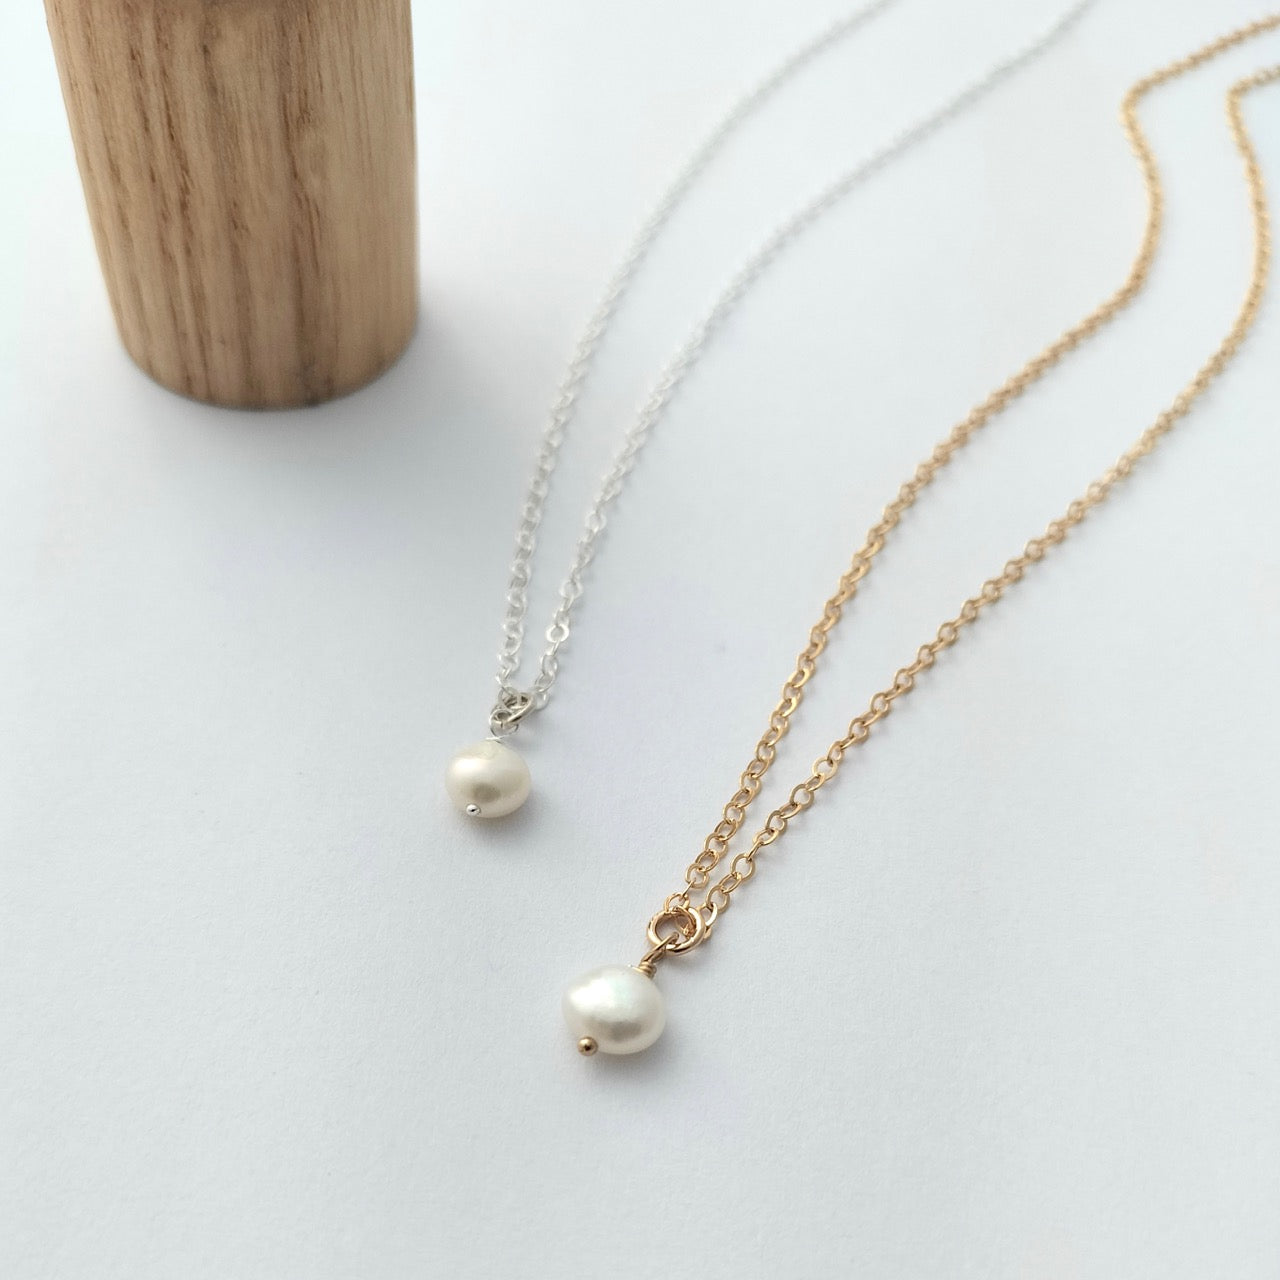 Small pearl necklaces